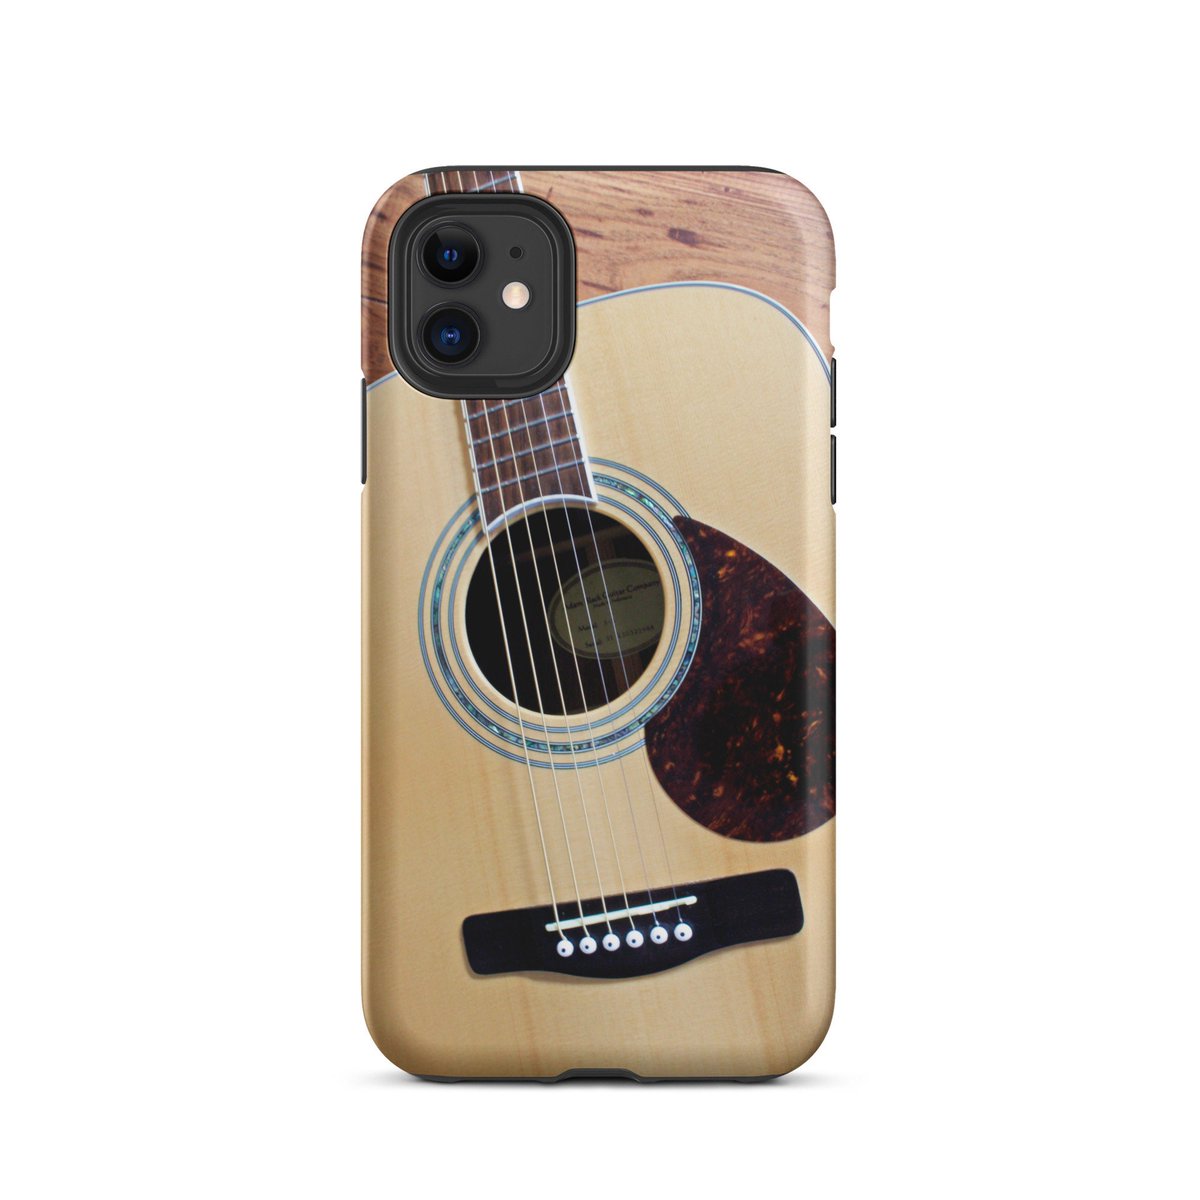 Excited to share the latest addition to my #etsy shop: Acoustic Guitar Tough iPhone case etsy.me/3PlABxj #guitariphonecase #acousticguitarcase #phonecase #iphone #iphonecase #guitariphone #iphoneguitar #countrymusic #folkmusic